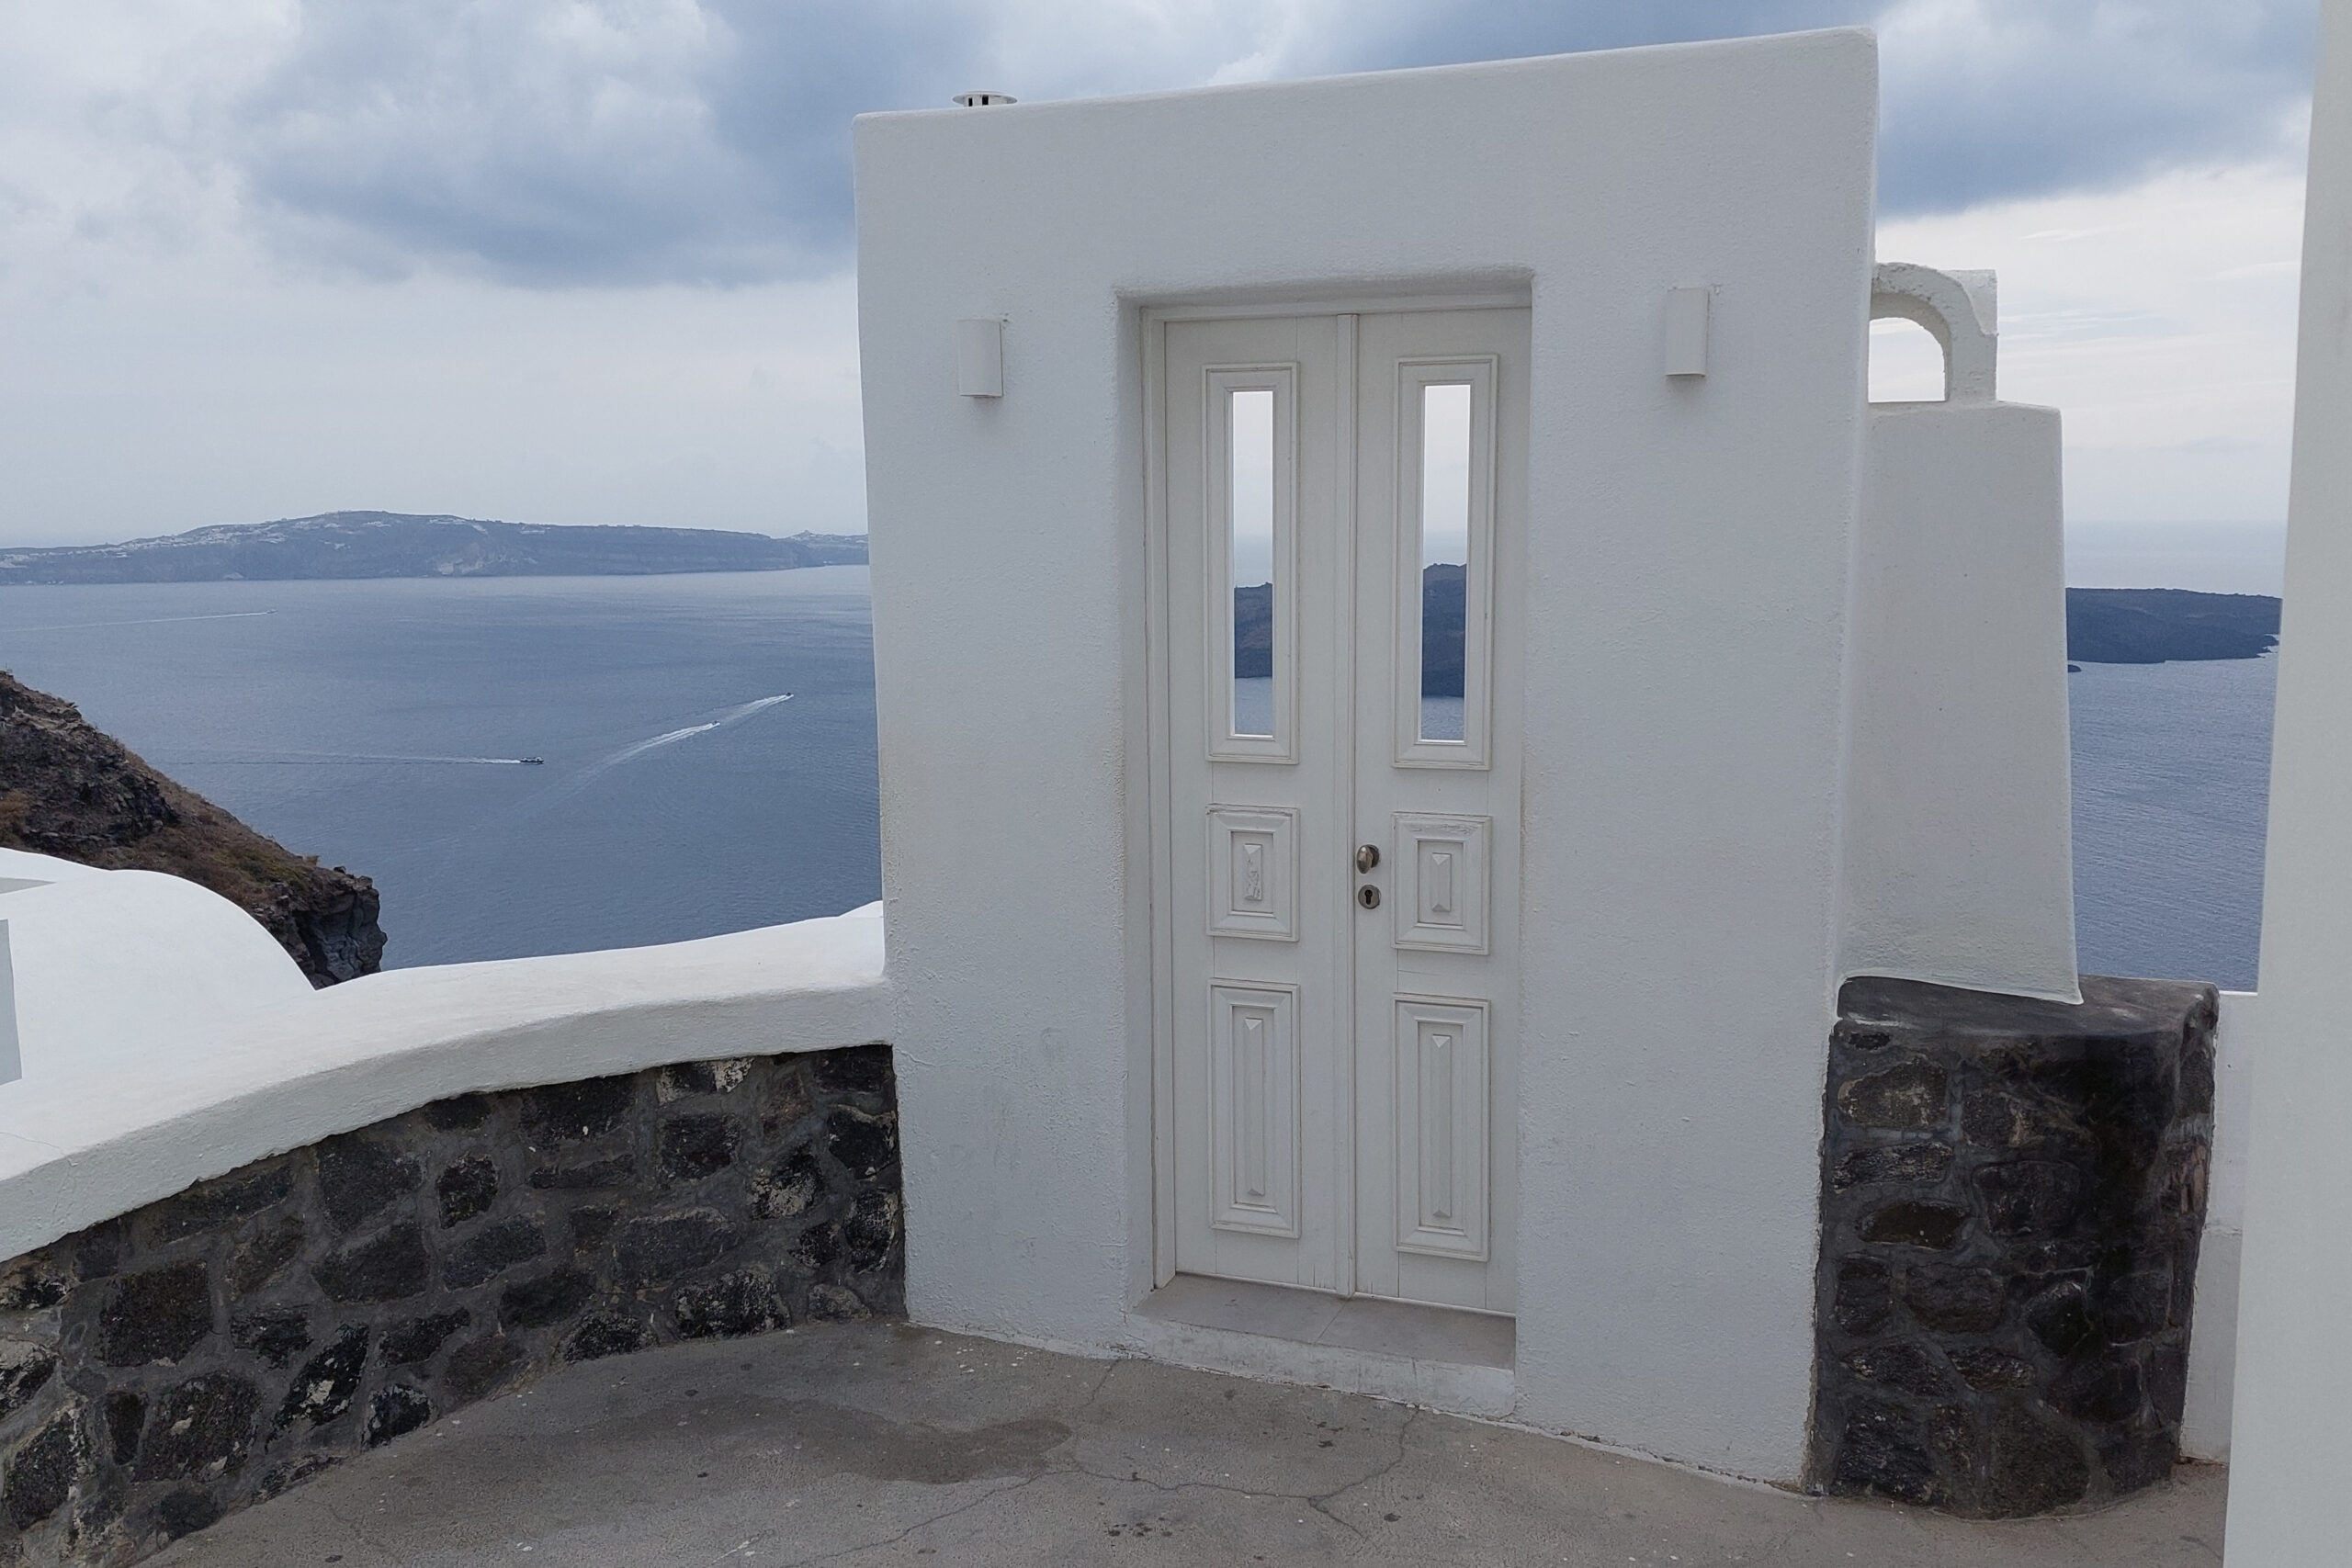 A door with two windows stands alone against dark blue water below and grey skies in the background. A short masonry wall with a white cap is visible in the foreground.